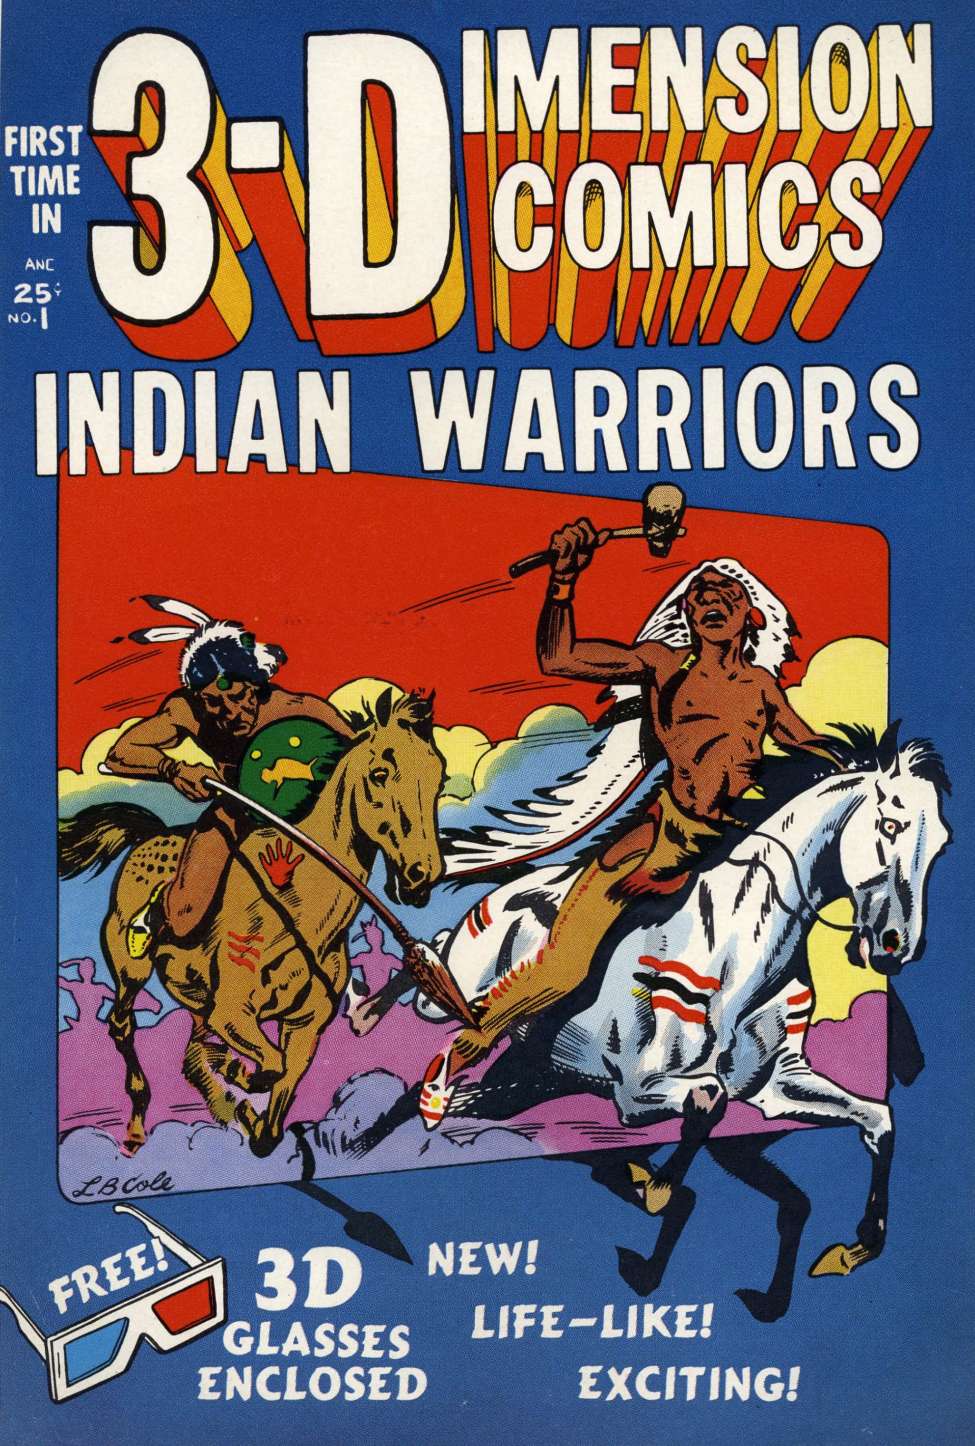 Book Cover For Indian Warriors 3-D